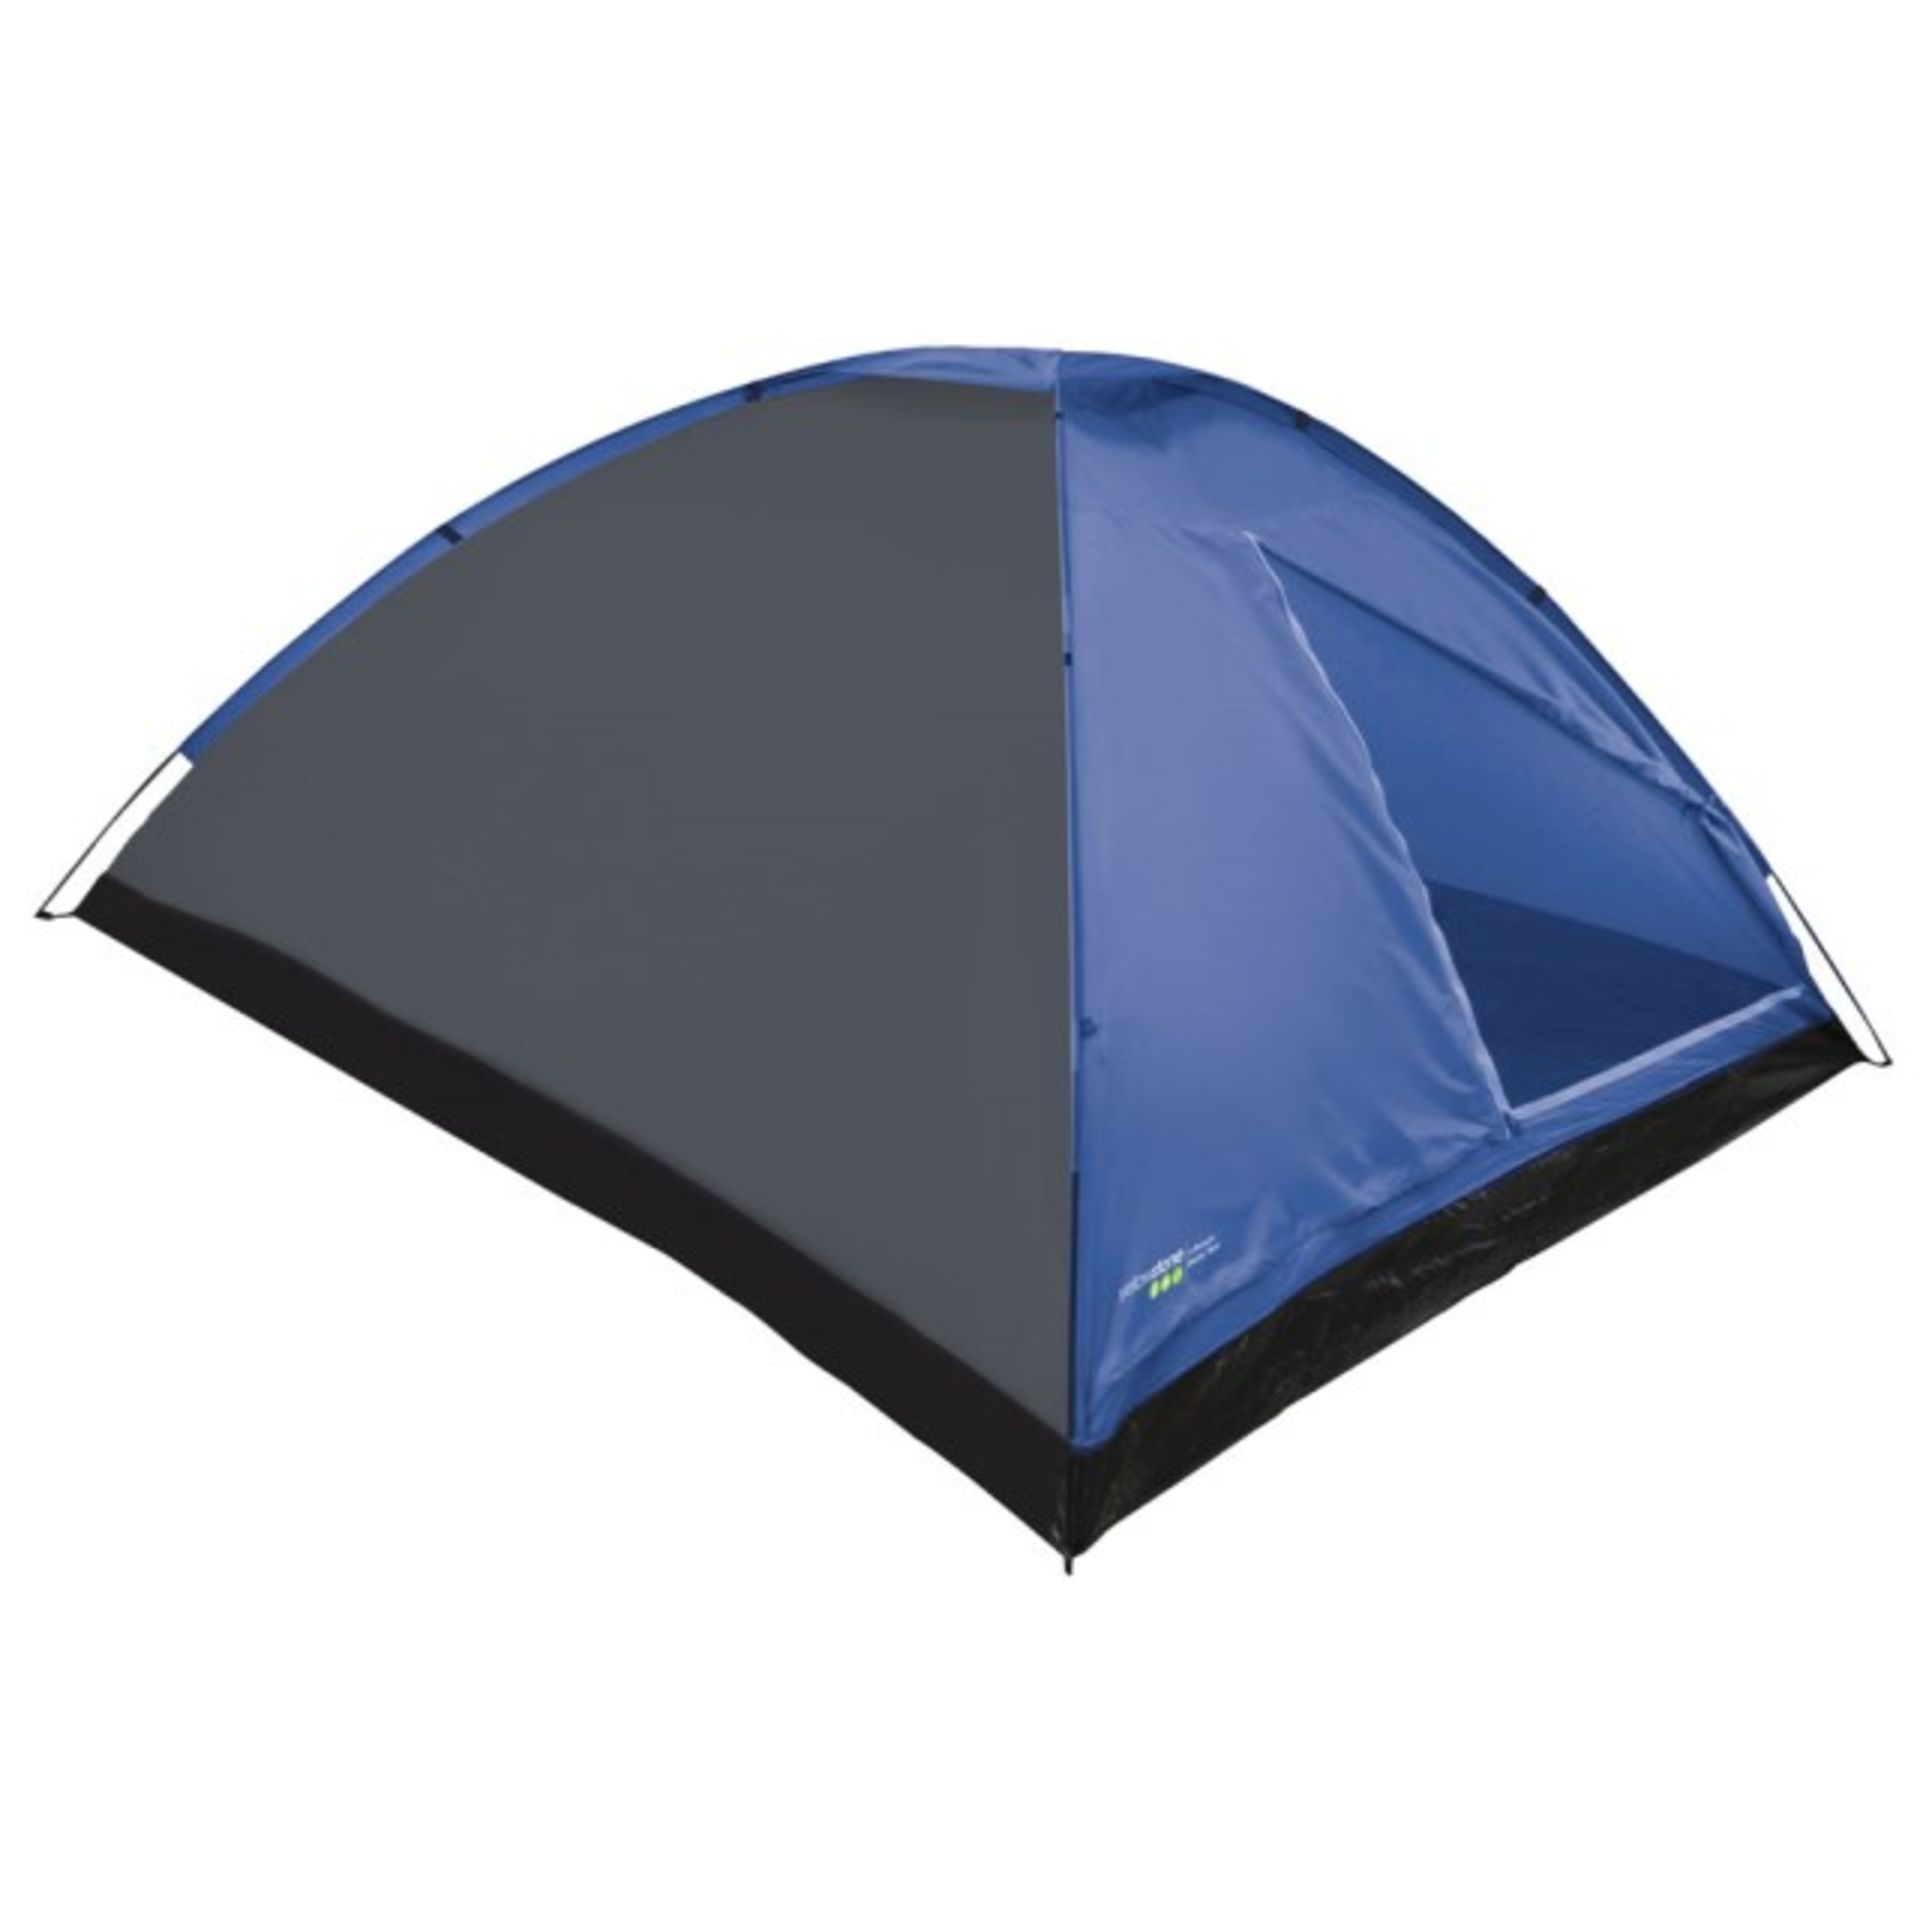 + VAT Brand New 4 Person Dome Tent With Taped seams And Fibreglass Poles RRP25.00